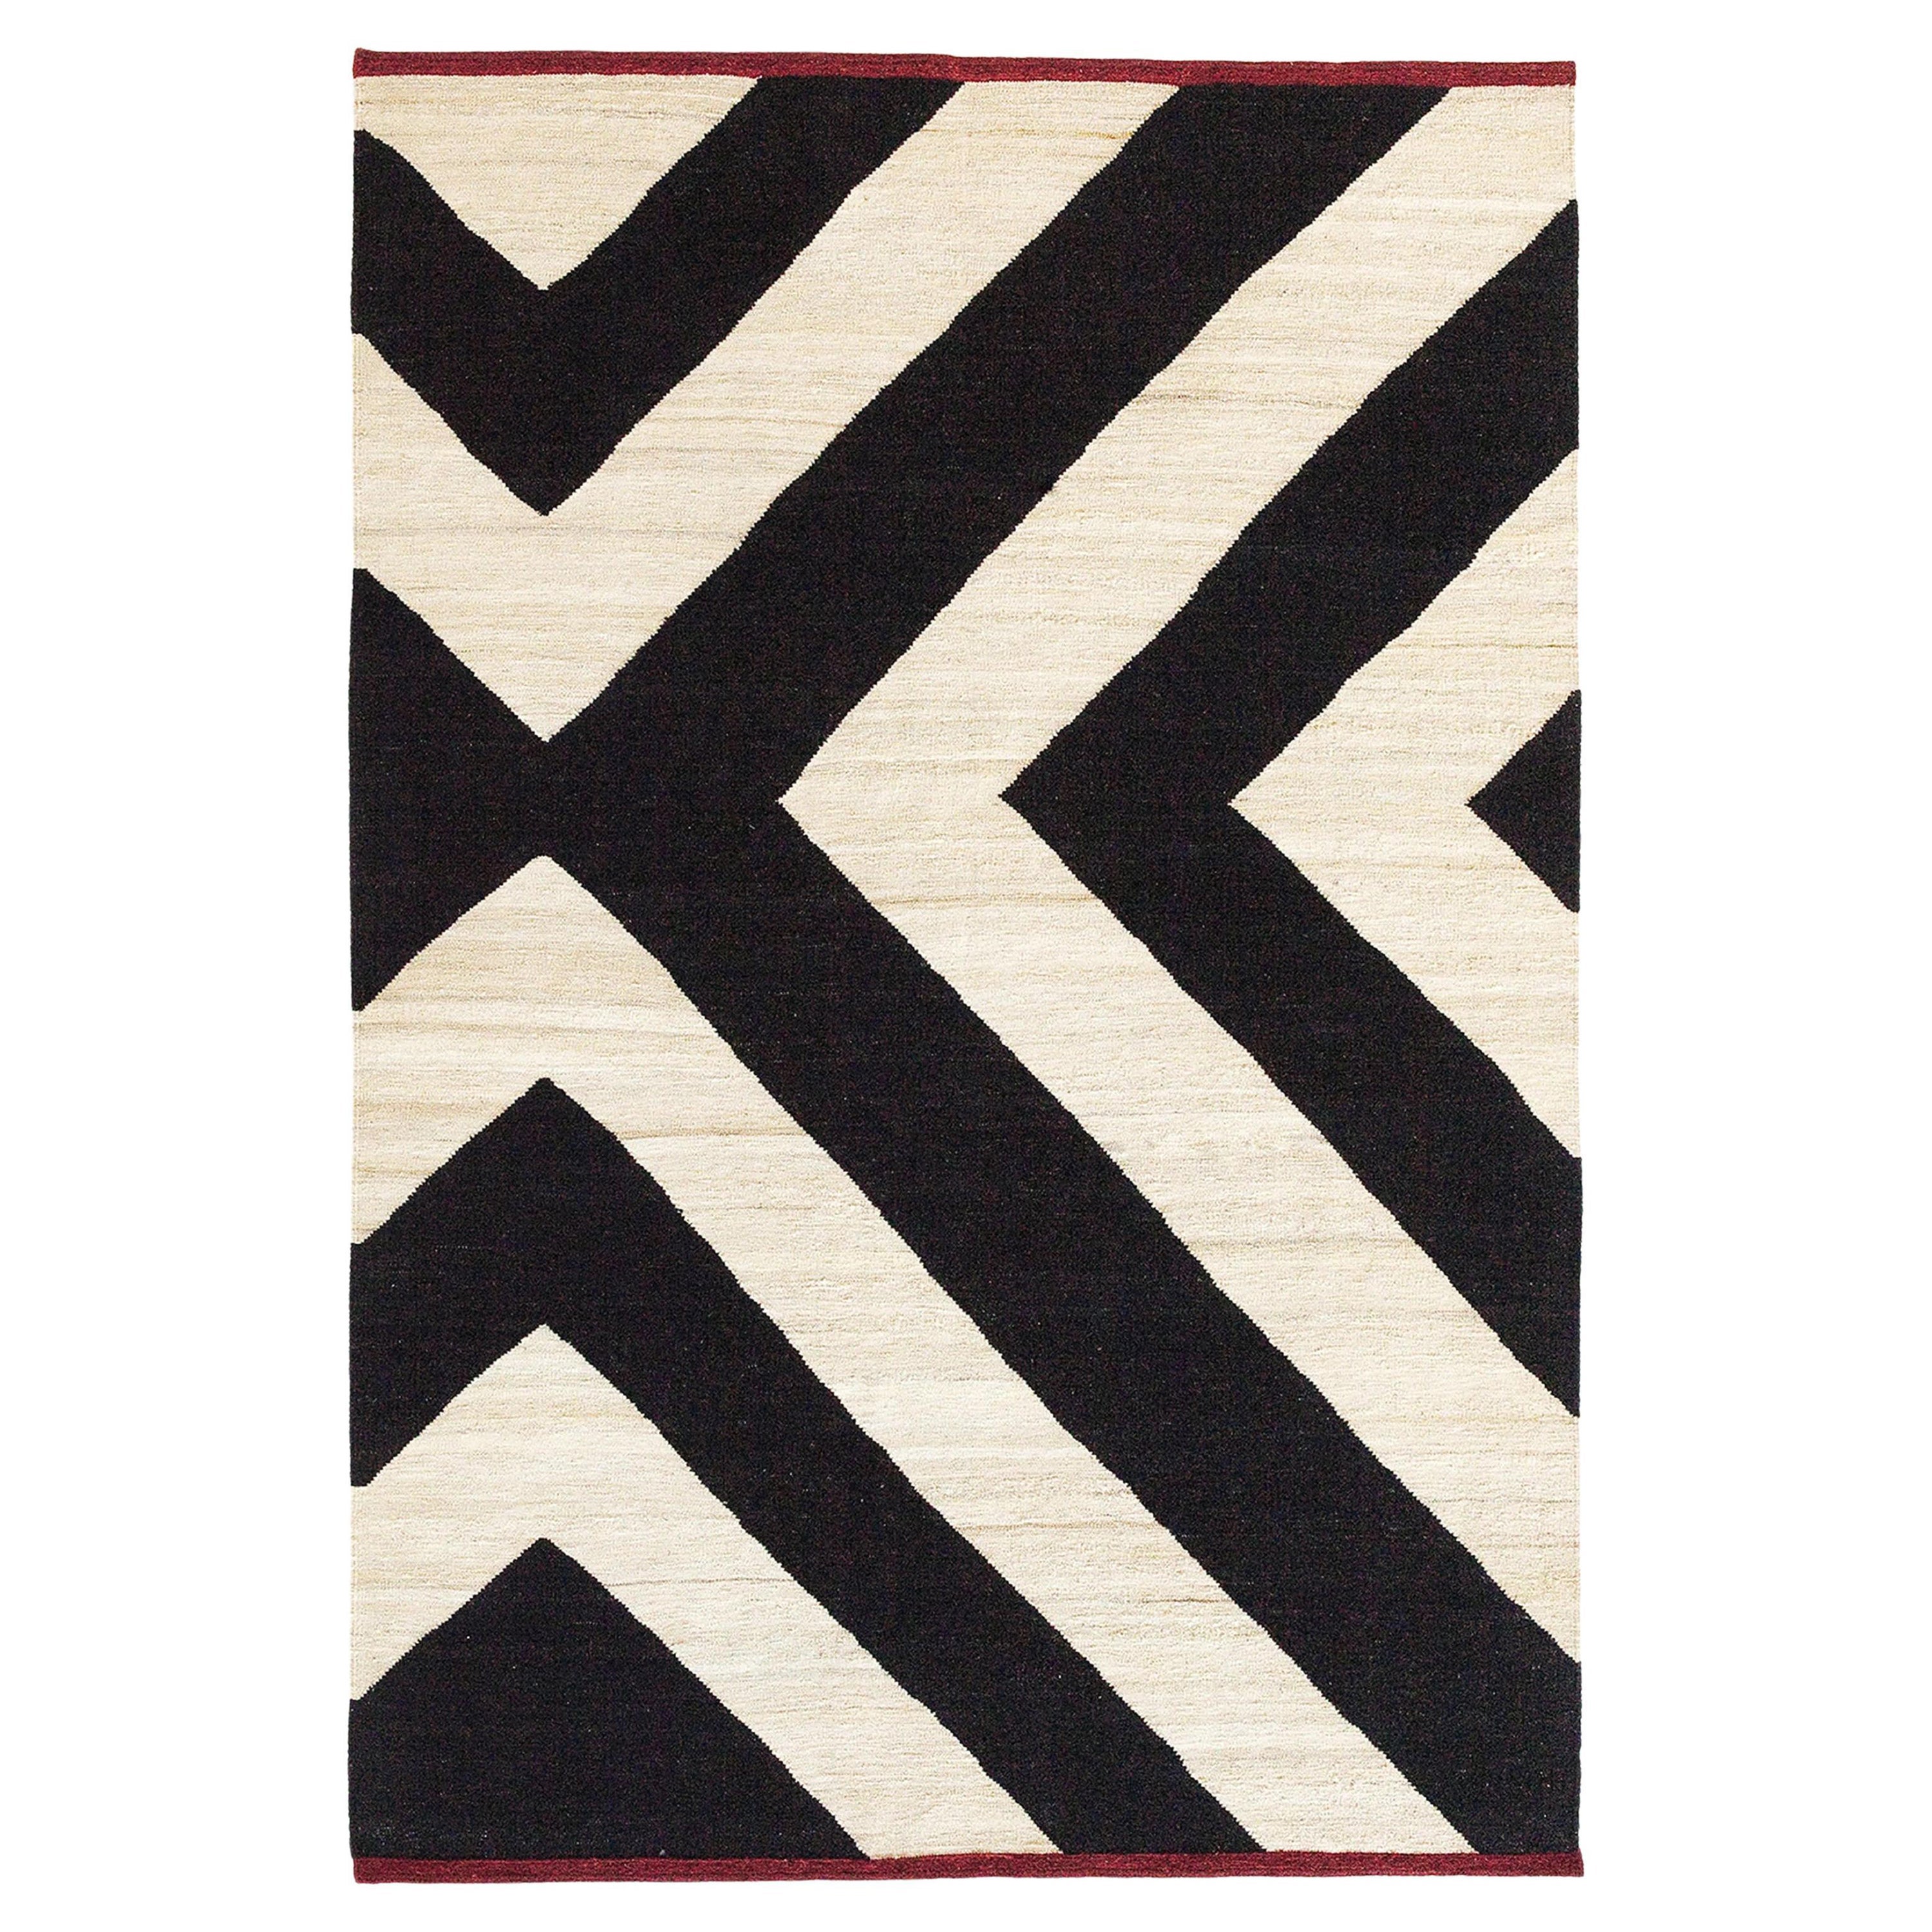 Large 'Mélange Zoom' Hand-Loomed Rug by Sybilla for Nanimarquina